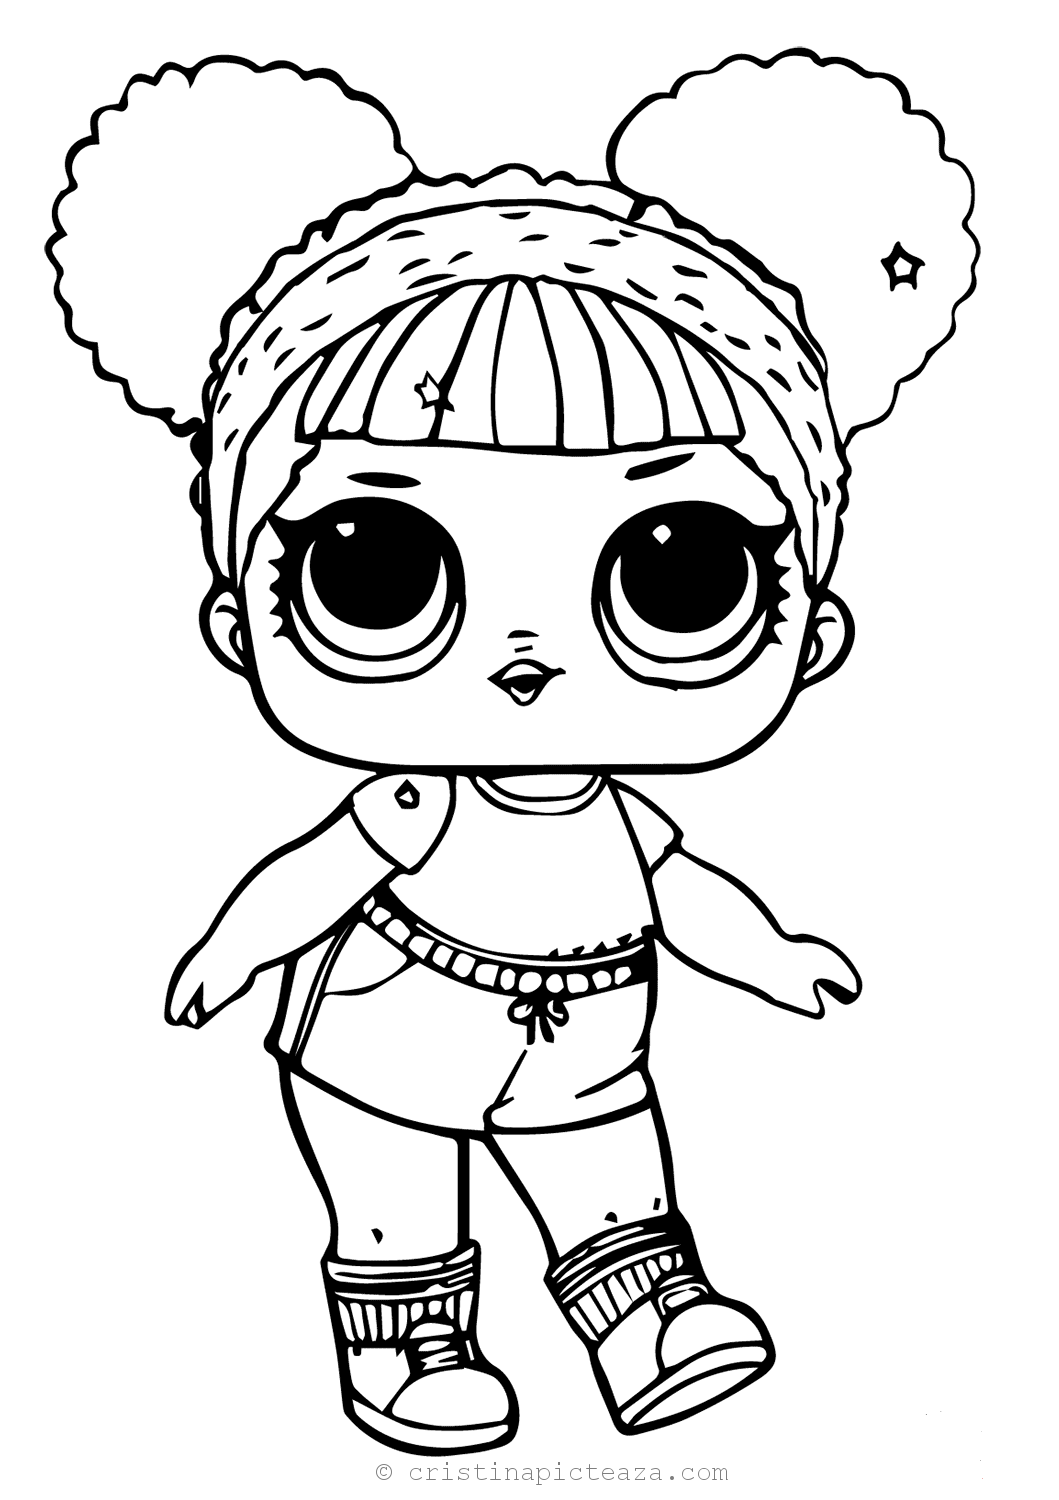 dolls coloring pages lol coloring pages lol dolls for coloring and painting dolls coloring pages 